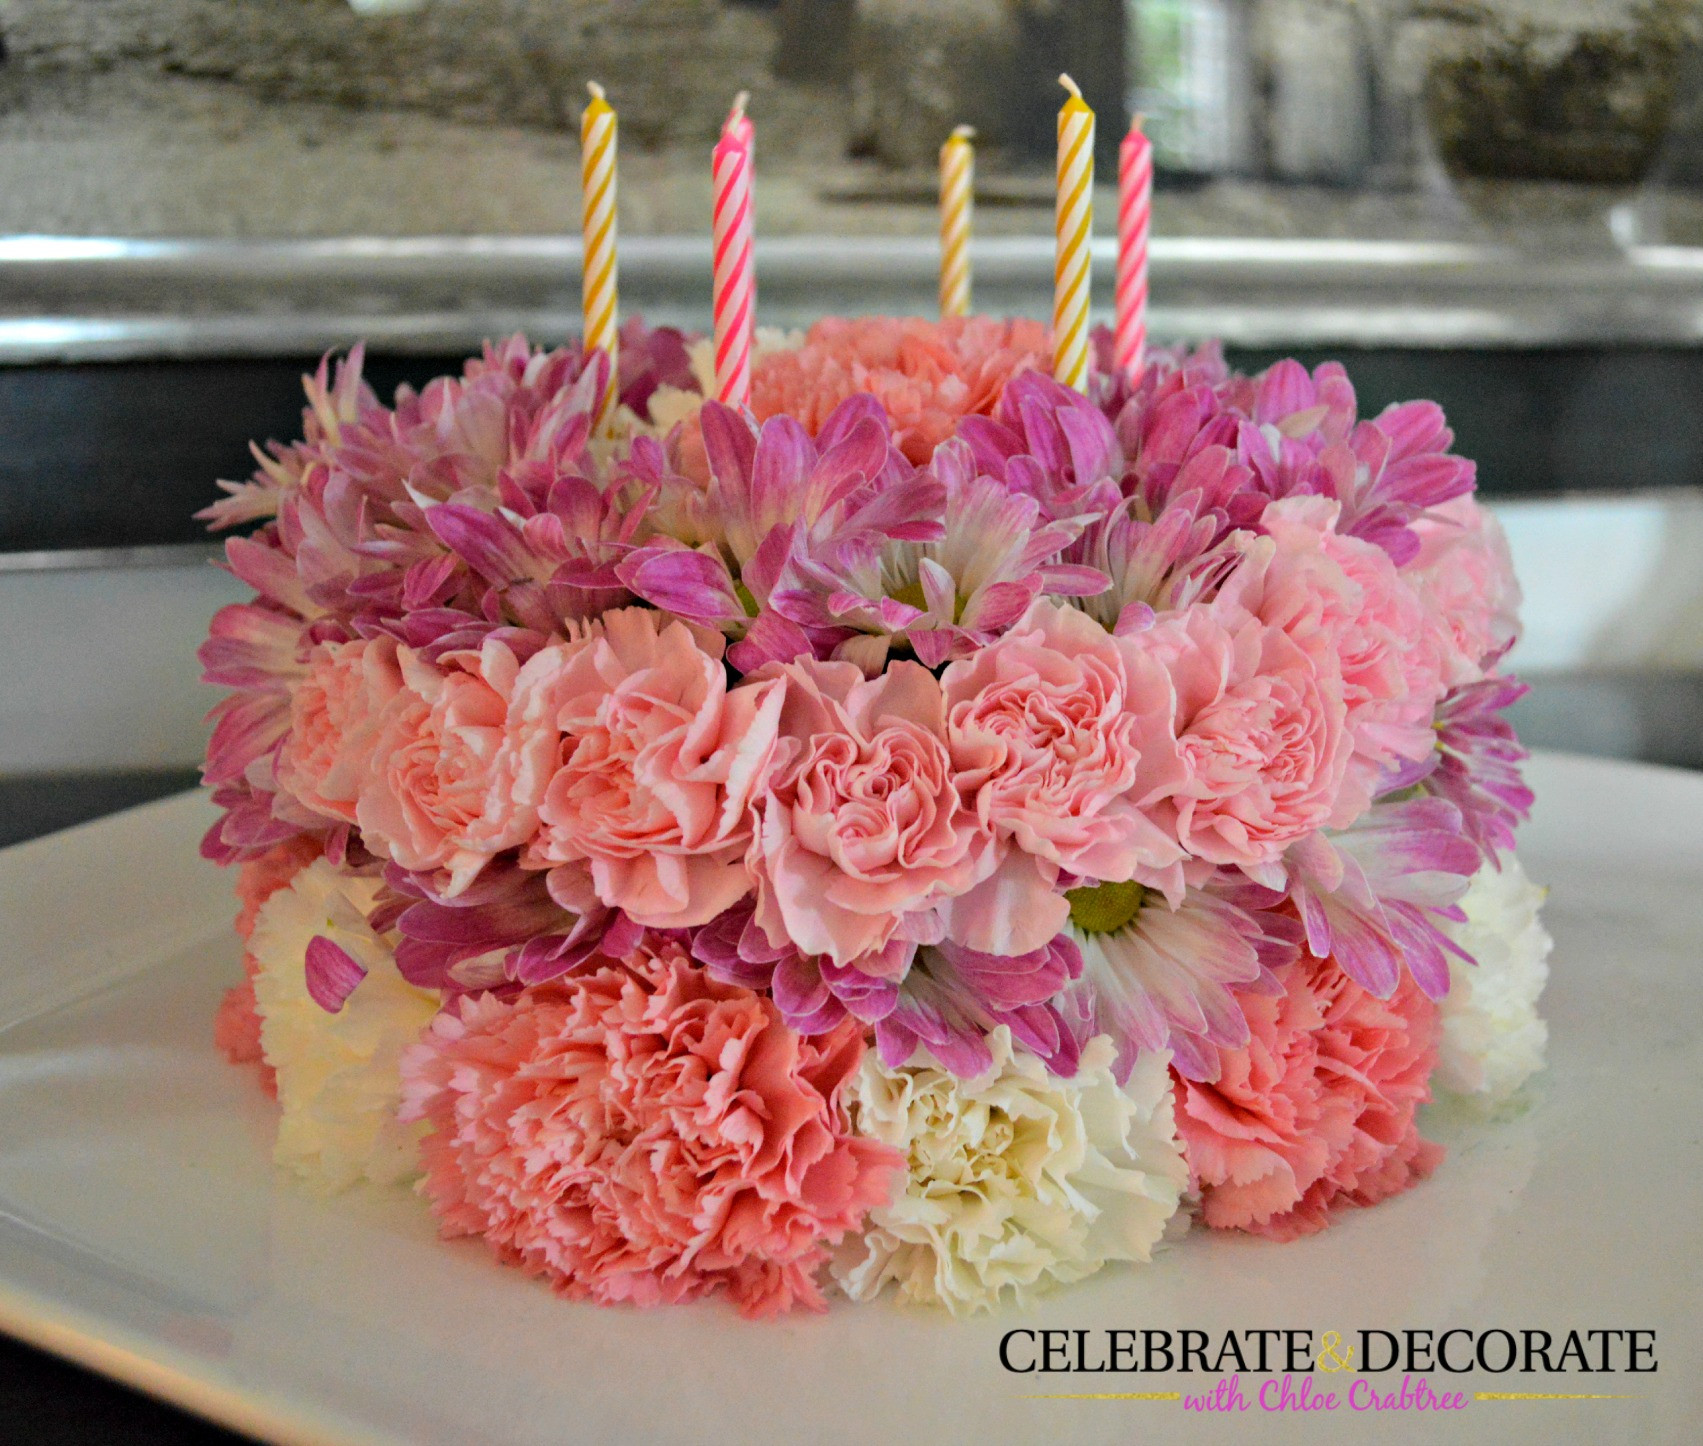 How To Make Birthday Cake
 How to Make a Floral Birthday Cake Celebrate & Decorate